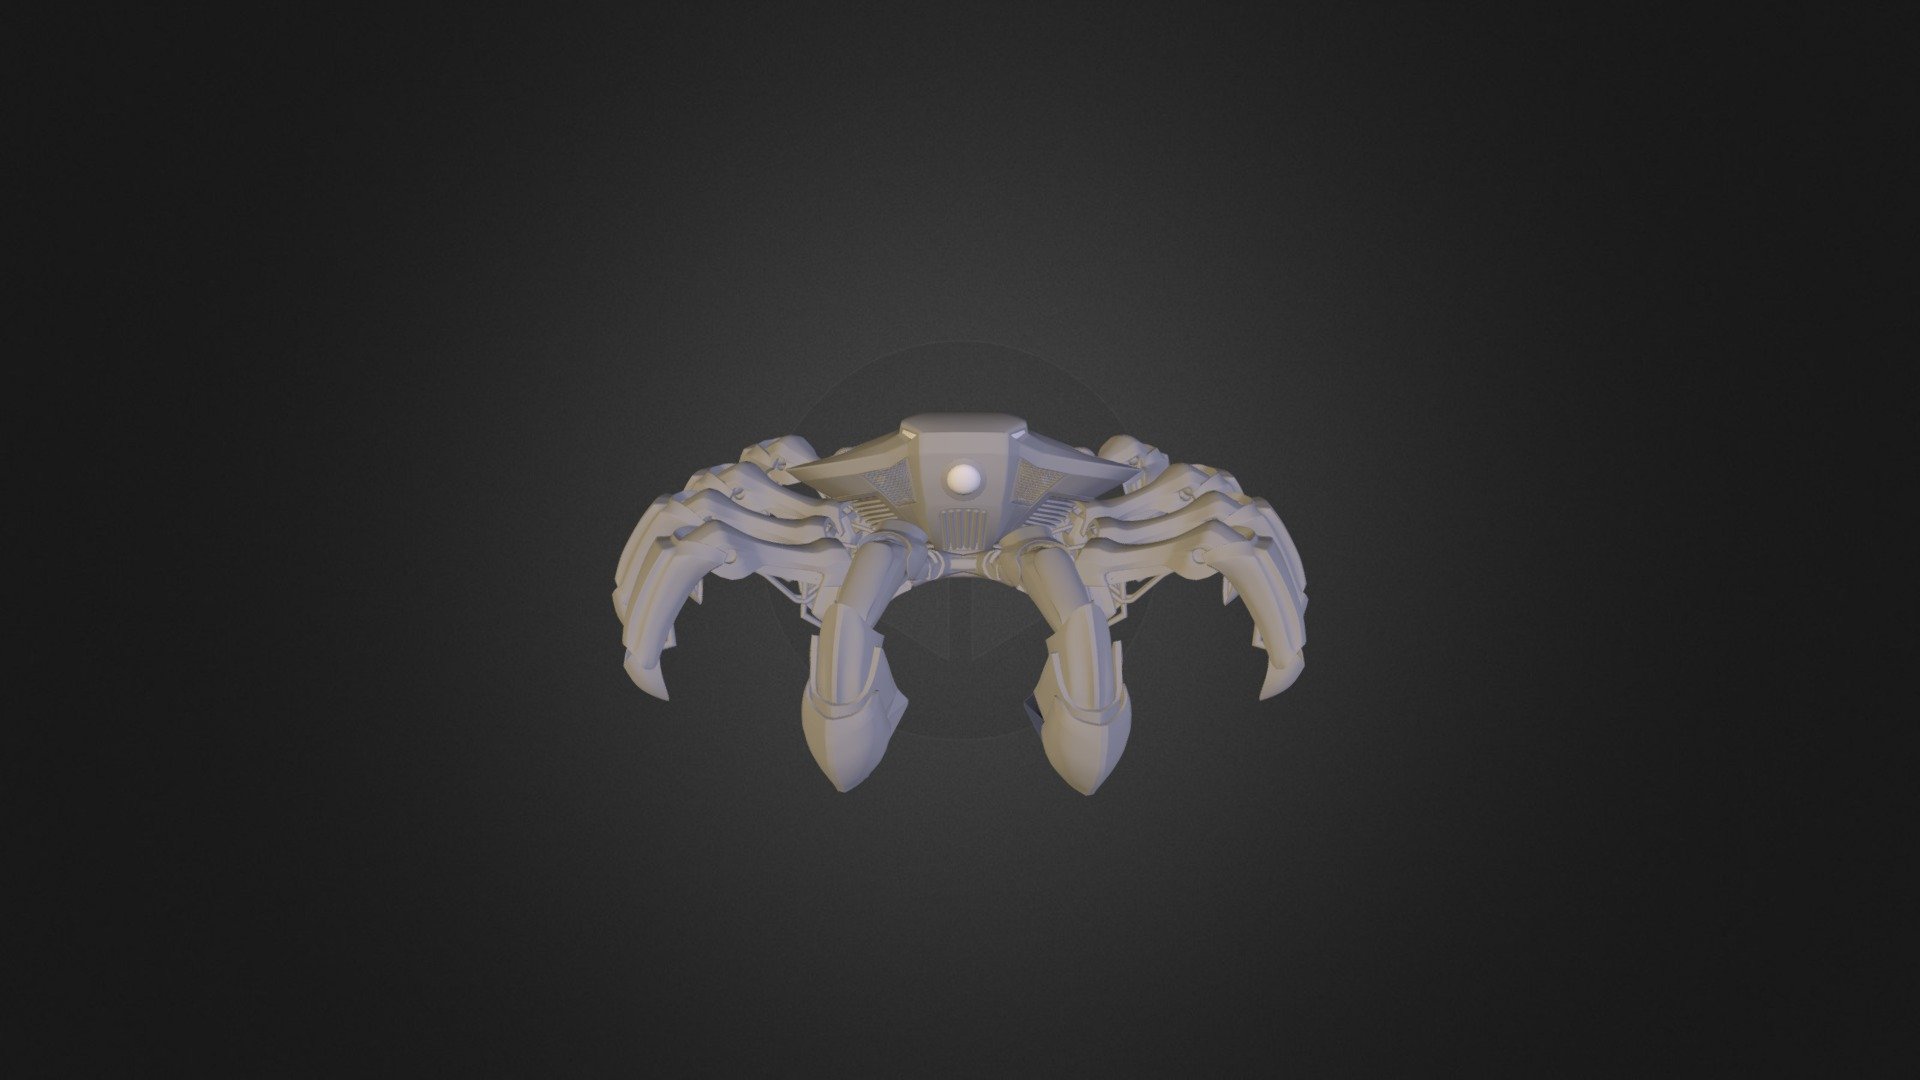 Crabby Exported 3d Model By Officialist [7ab2e0f] Sketchfab